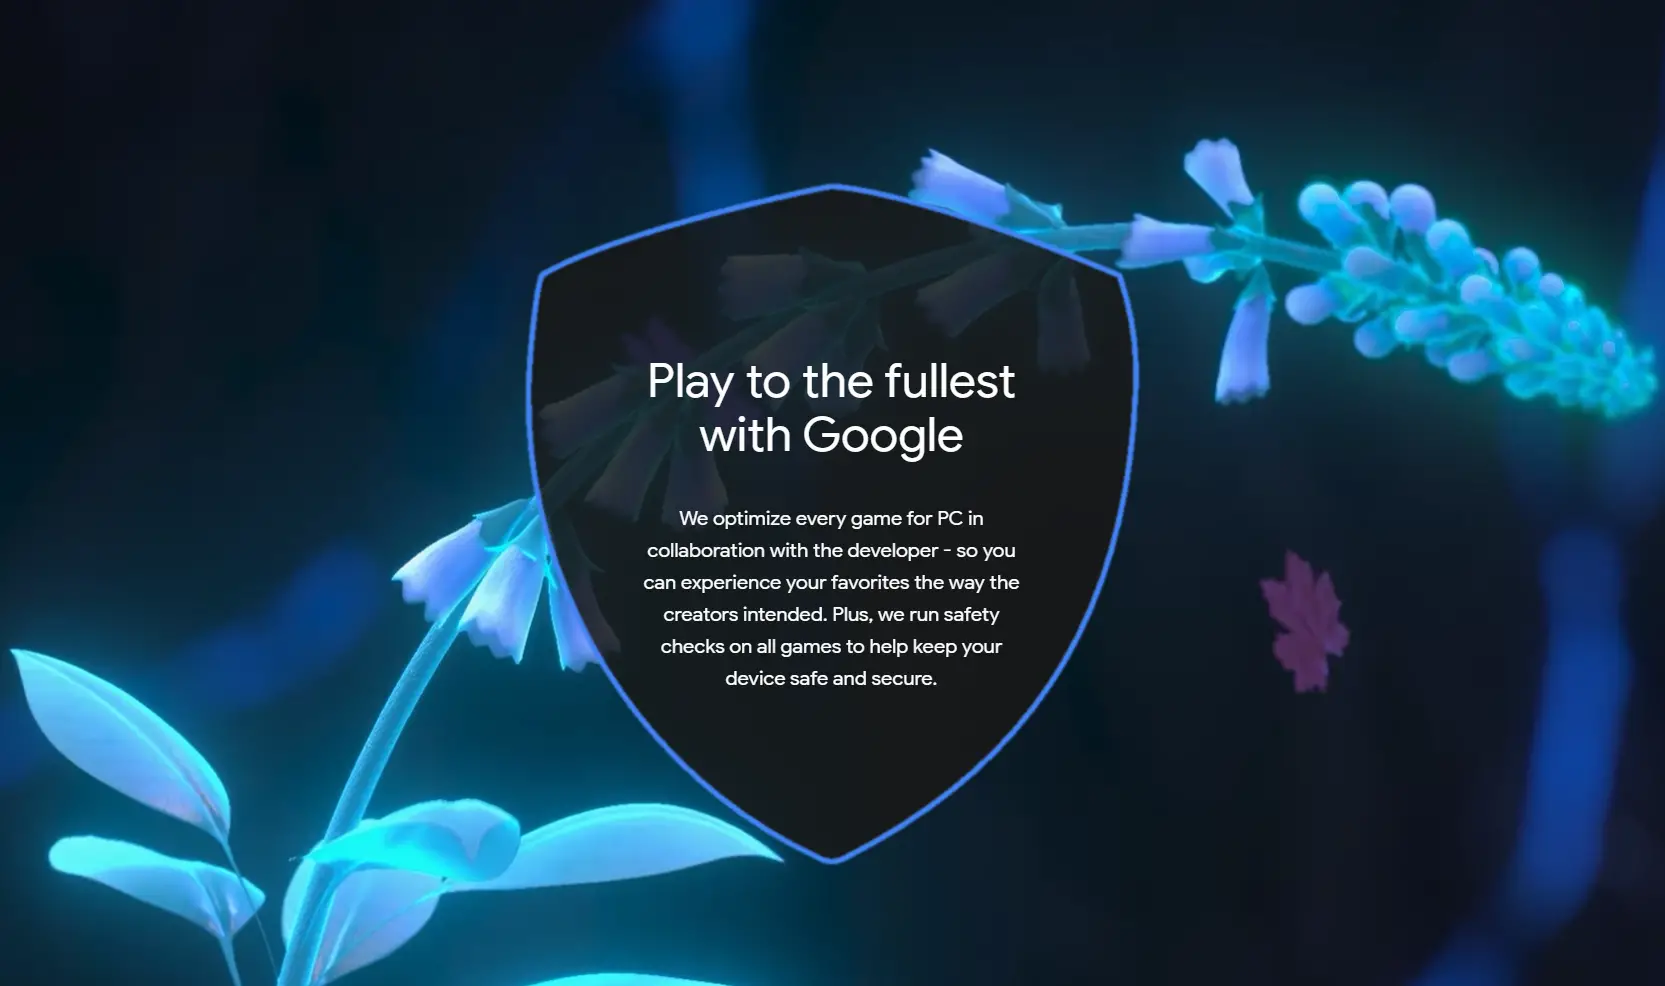 Google Play Games Beta on PC expands with new titles, regions, and features  - Neowin